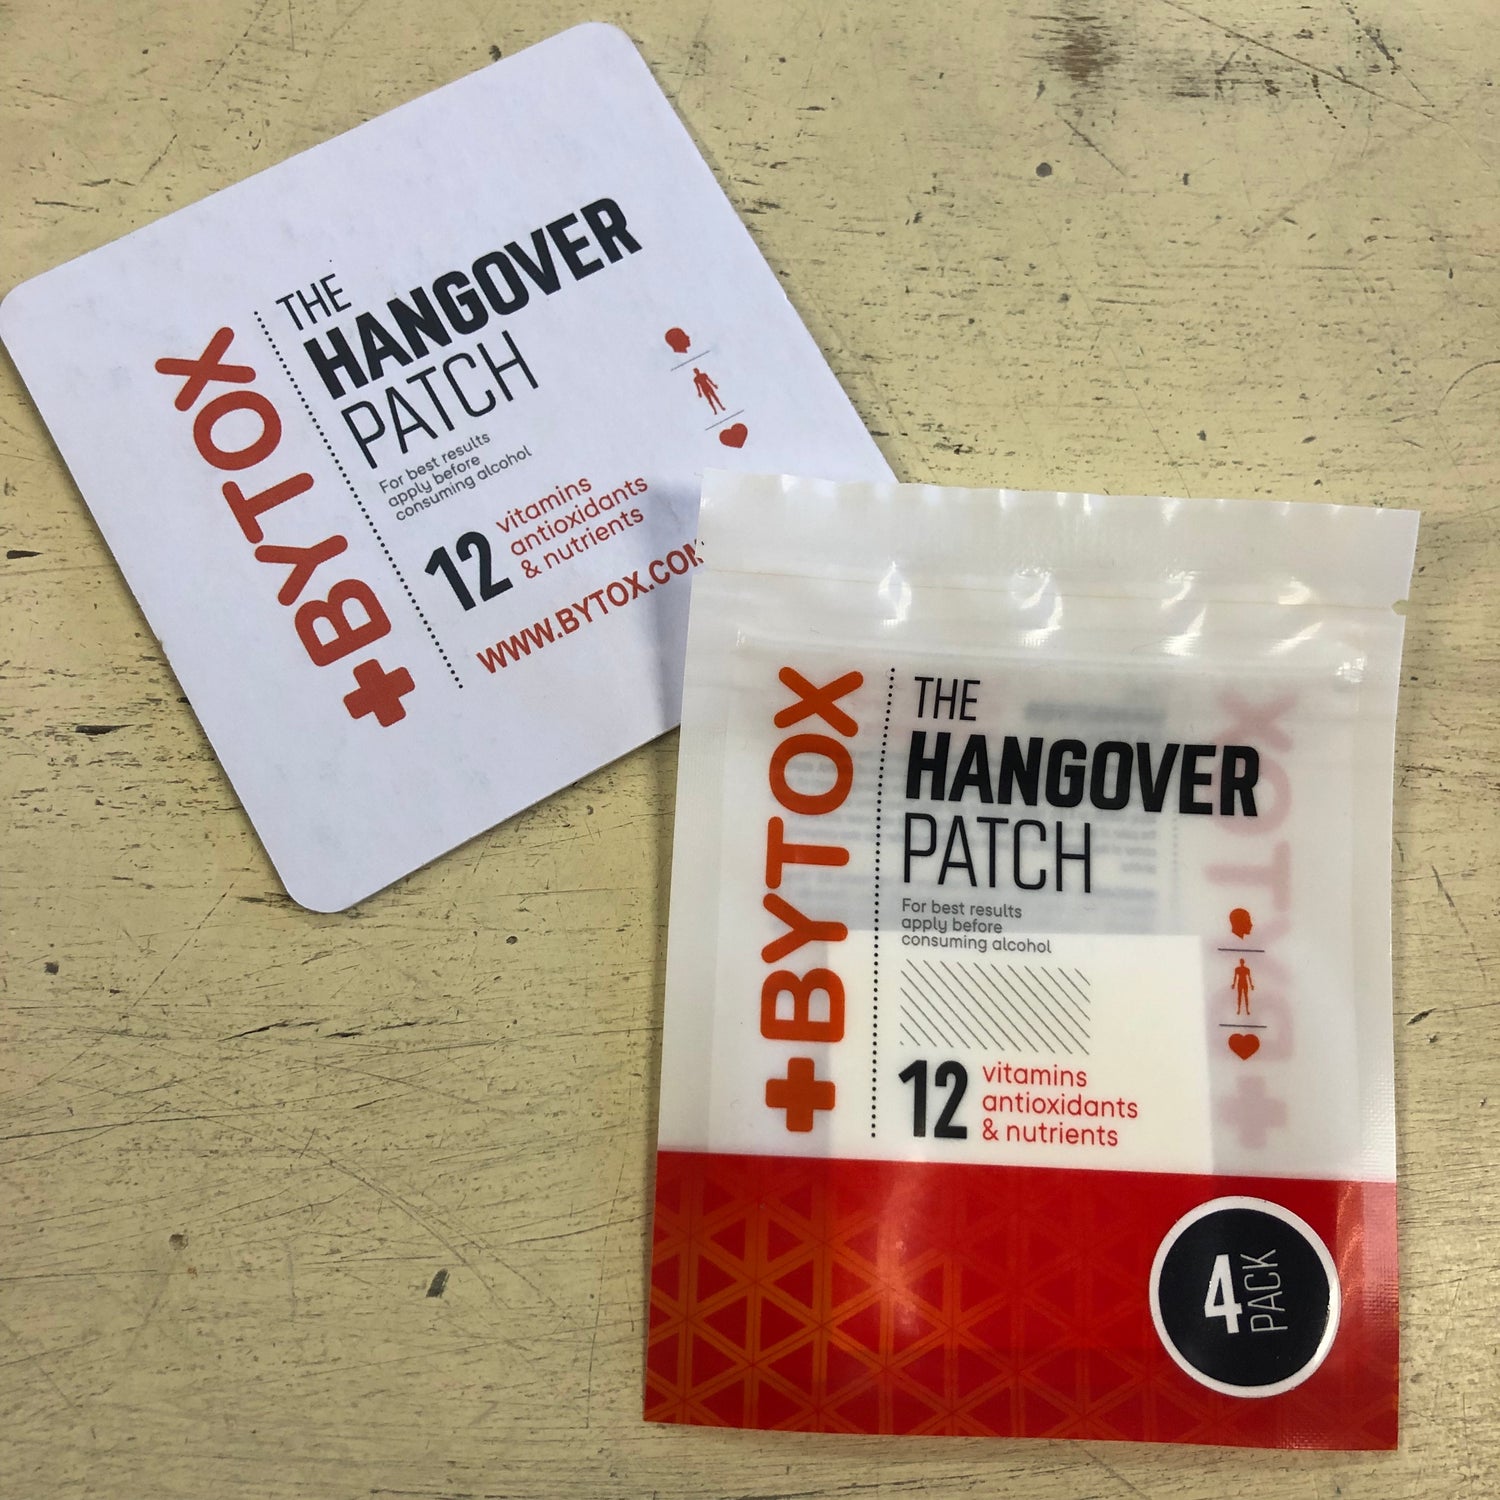 Review of #BYTOX HANGOVER PATCH Bytox Hangover Prevention Patches